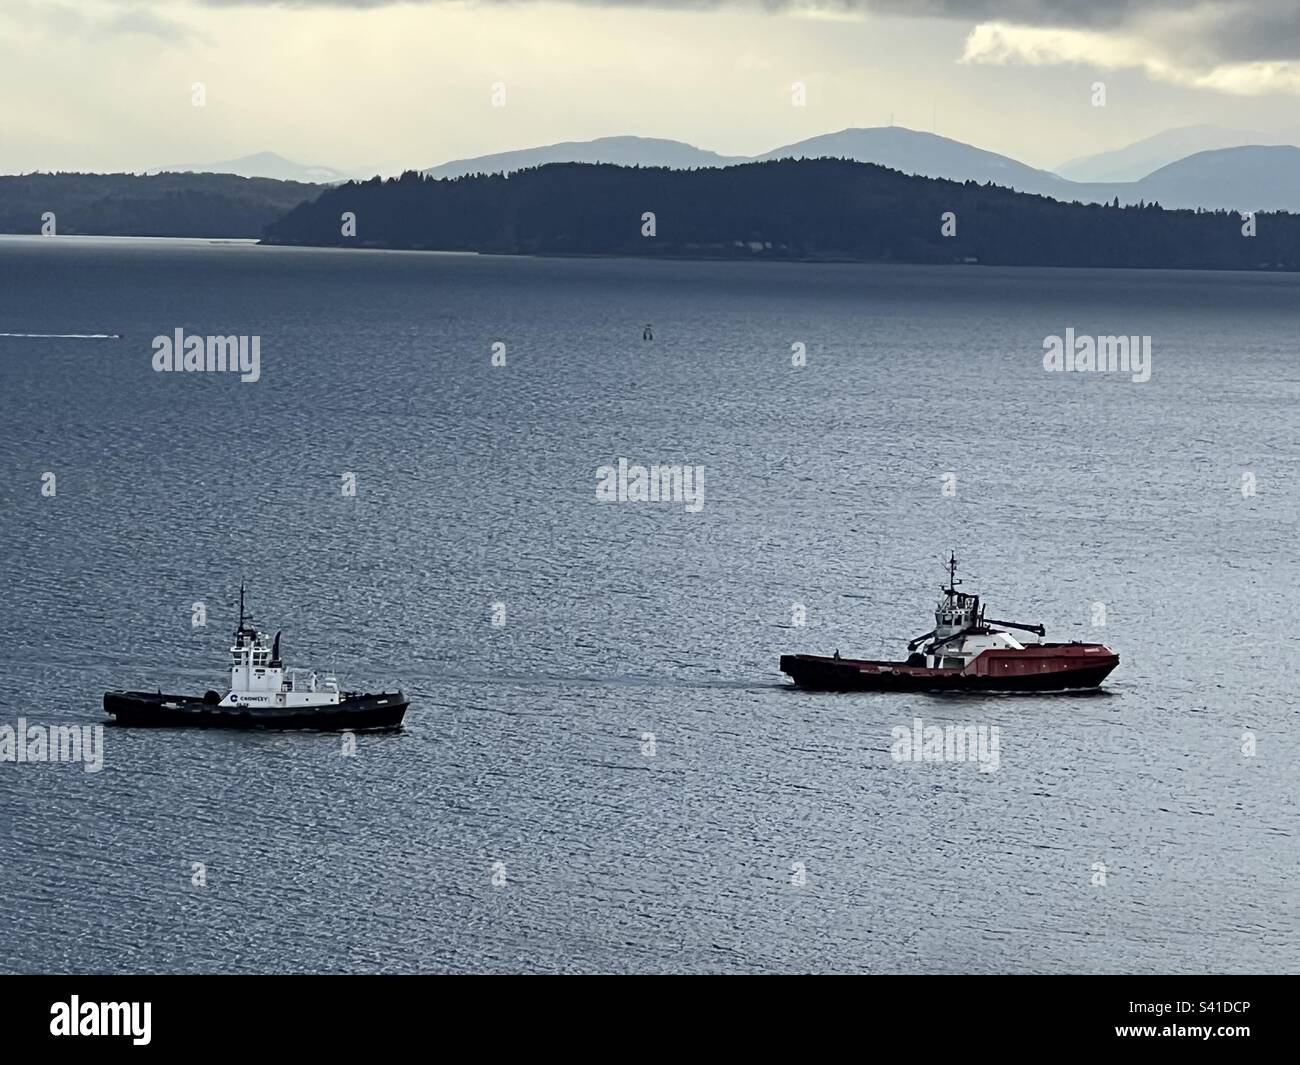 Two tugboats waiting for container ship to arrive so they can help dock to unload at Seattle harbor, Elliot Bay, Puget Sound, WA State, PNW, USA. Olympic Mountains in background across Salish Sea. Stock Photo